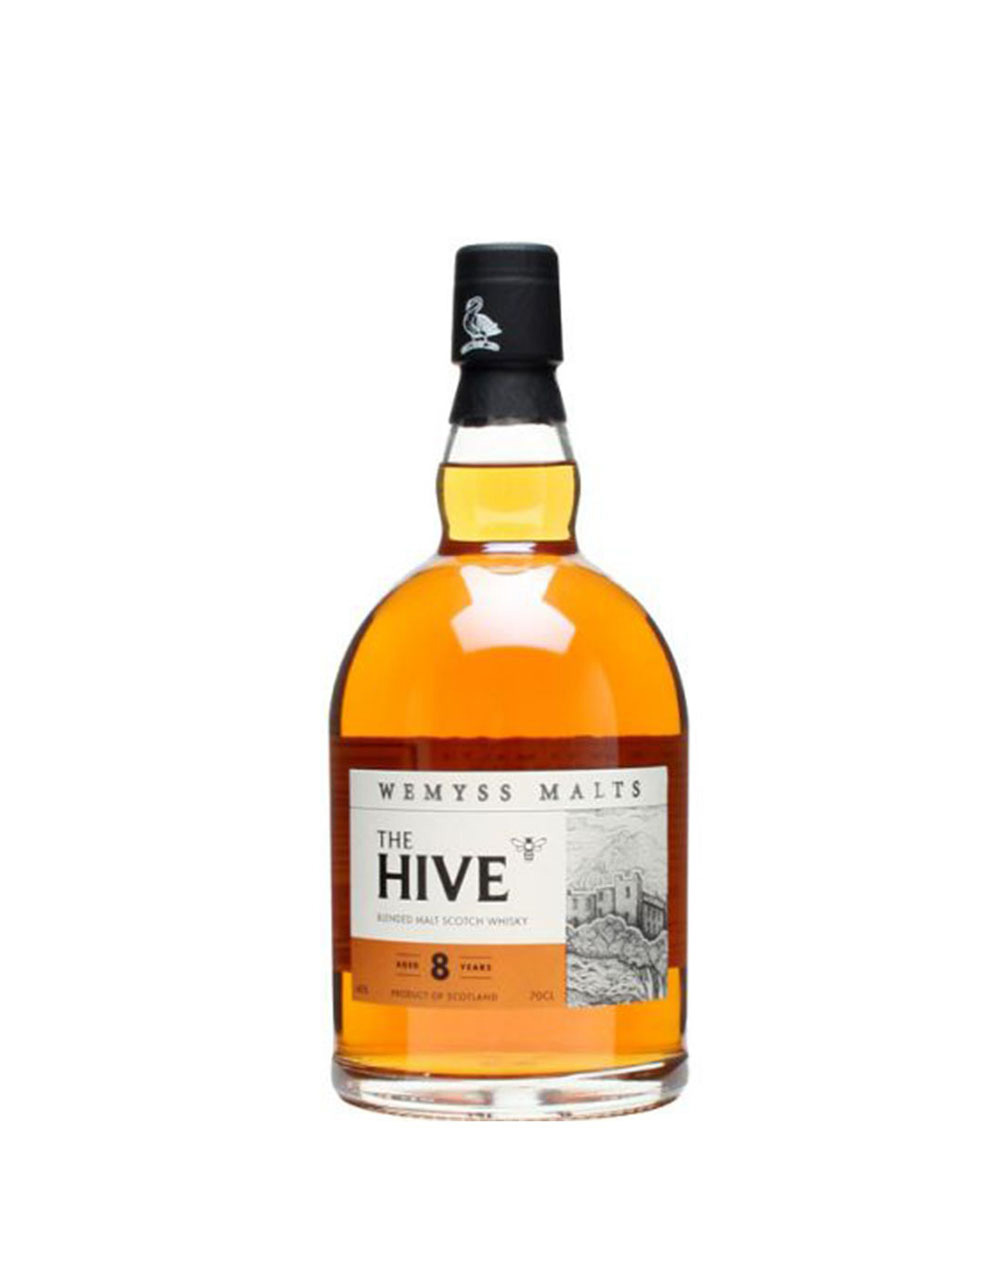 The Hive 8 Year Old Blended Malt Scotch Whisky